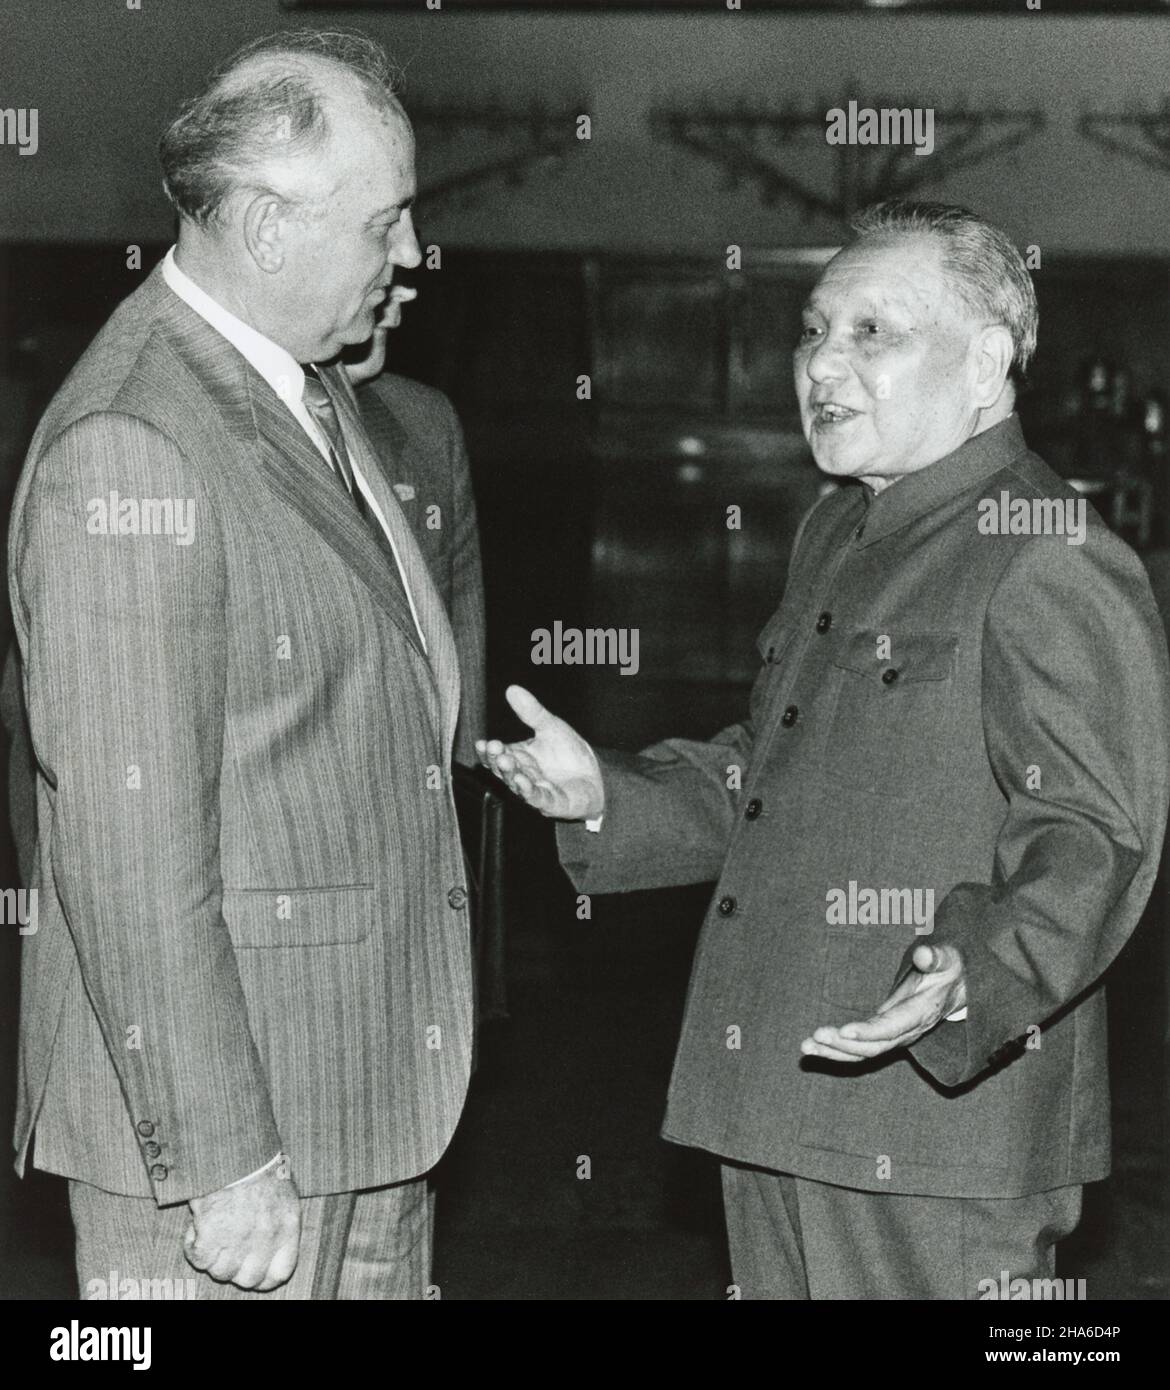 Former Chinese leader Deng Xiaoping greets former leader of the Soviet Union Mikhail Gorbachev in the Great Hall of the People in May 1989. Their meeting is considered the end of the 'Sino-Soviet split.' Stock Photo